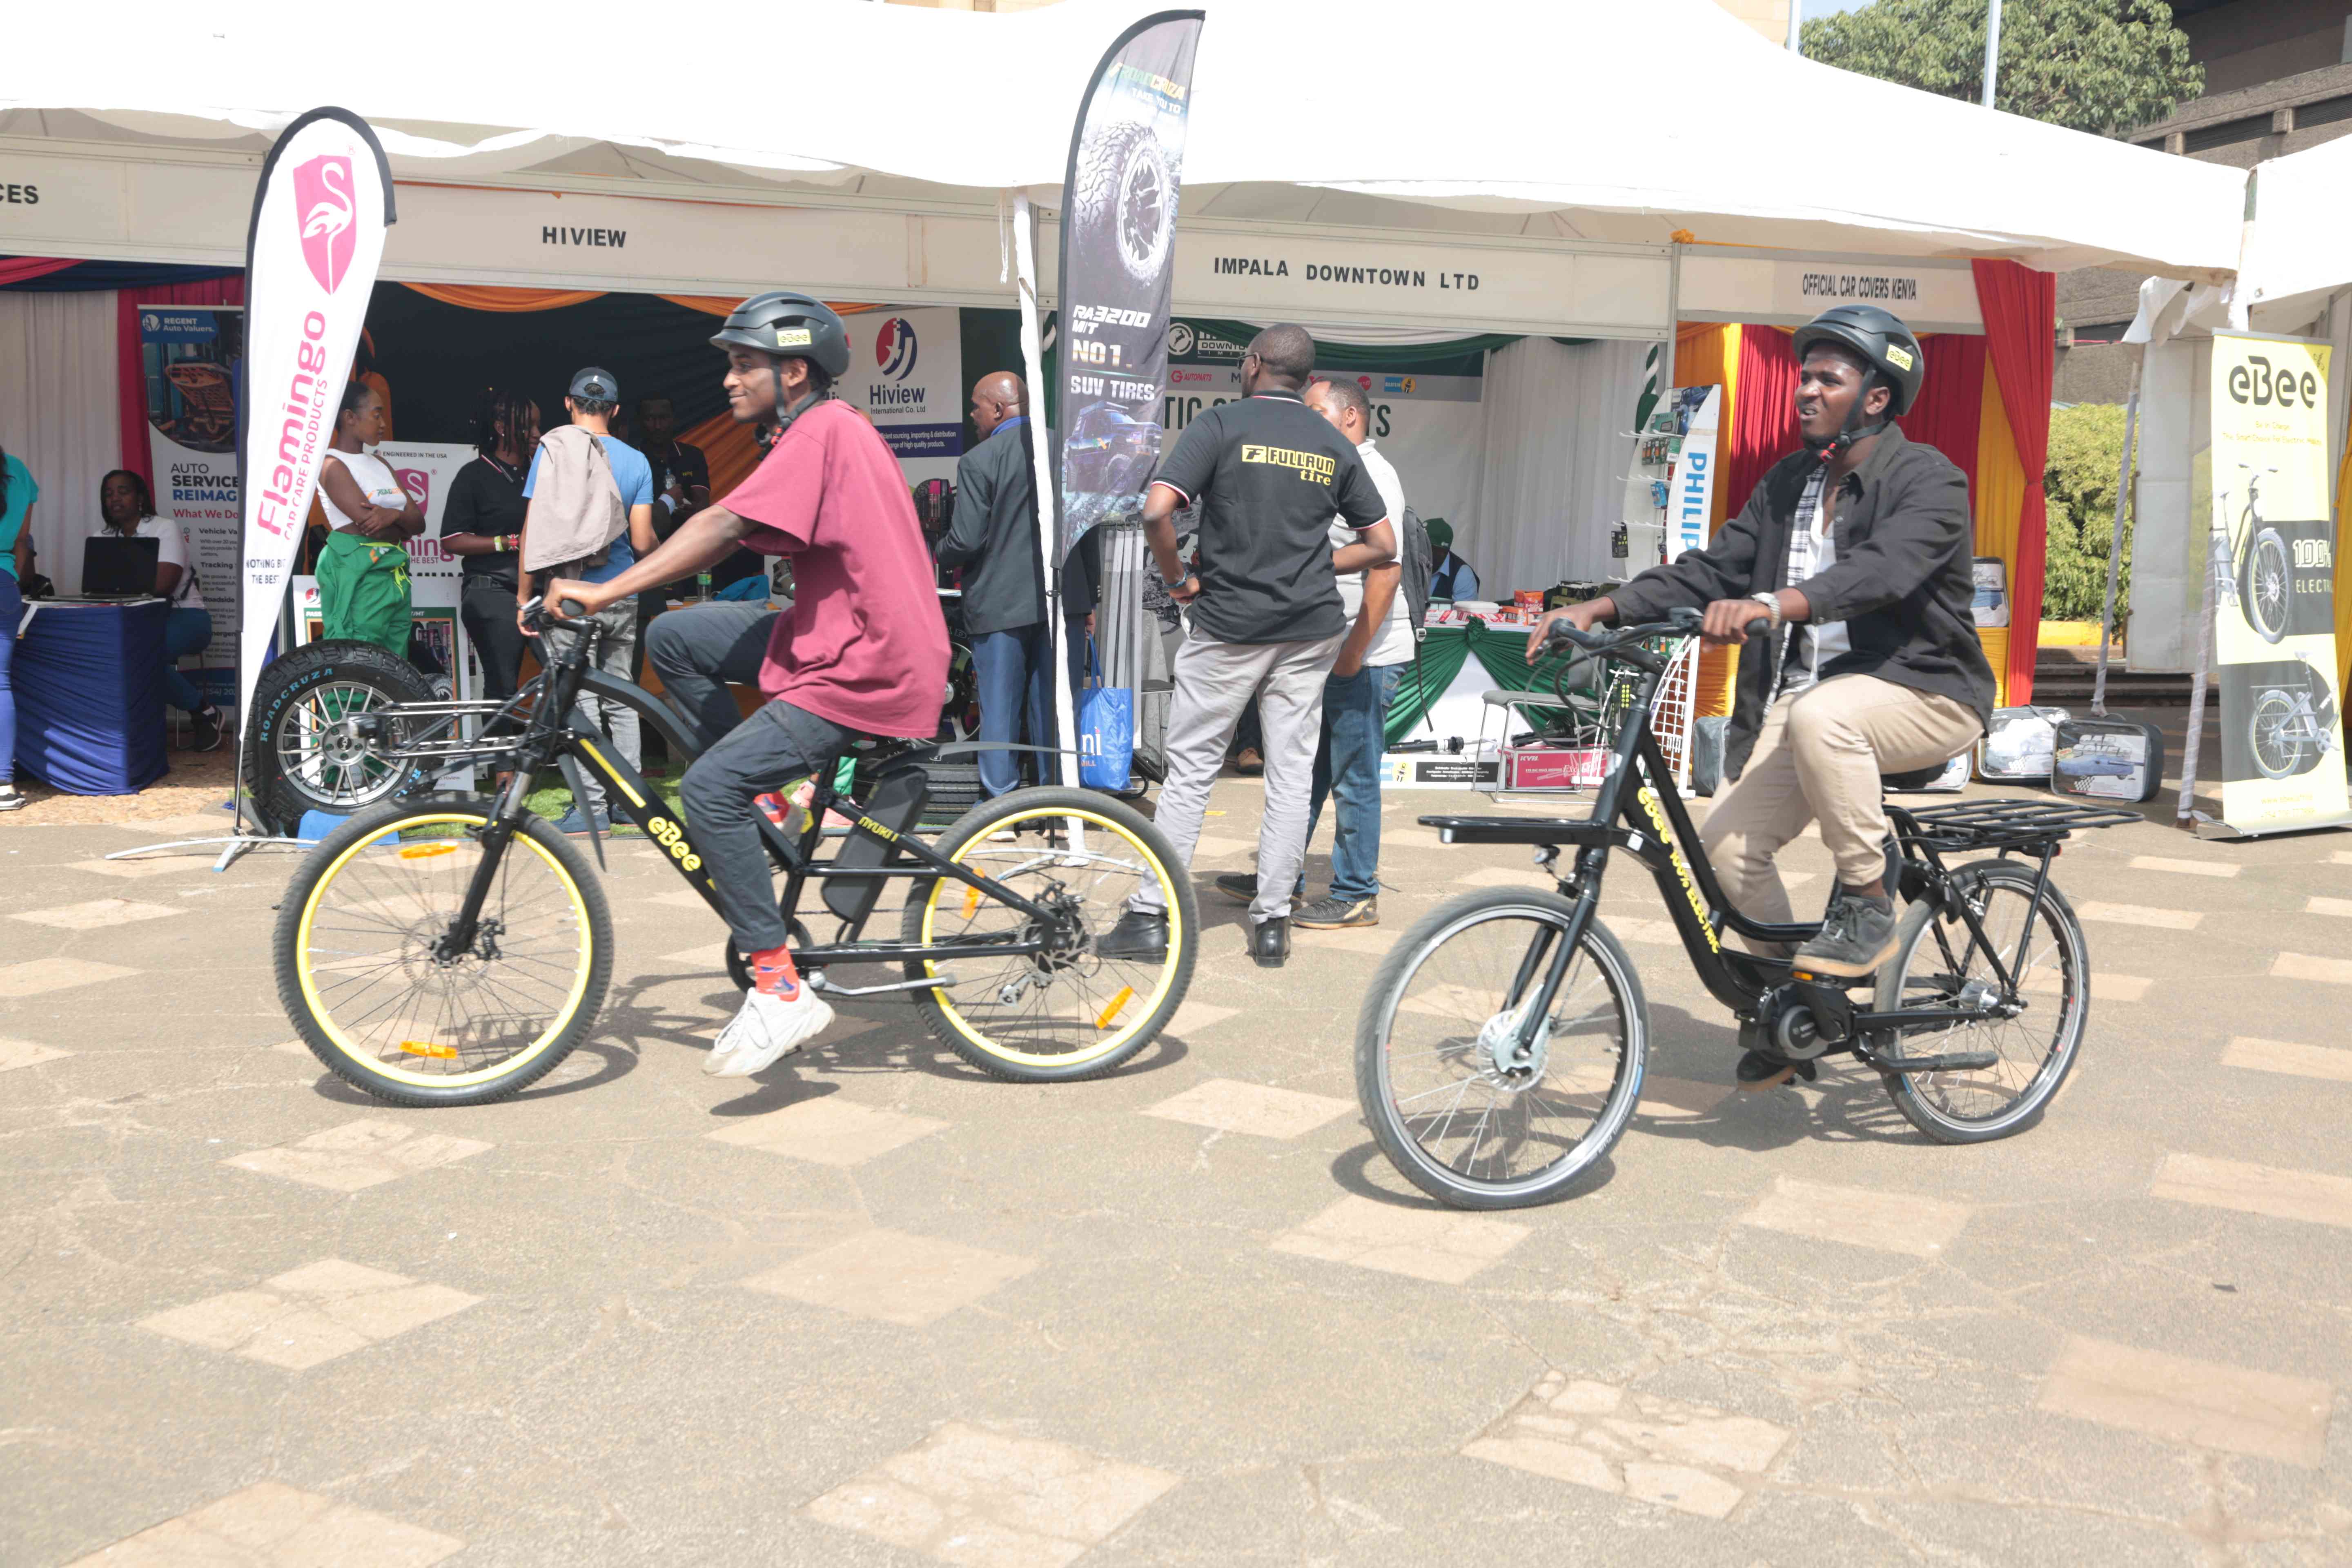 Visitors testing out the e-bikes